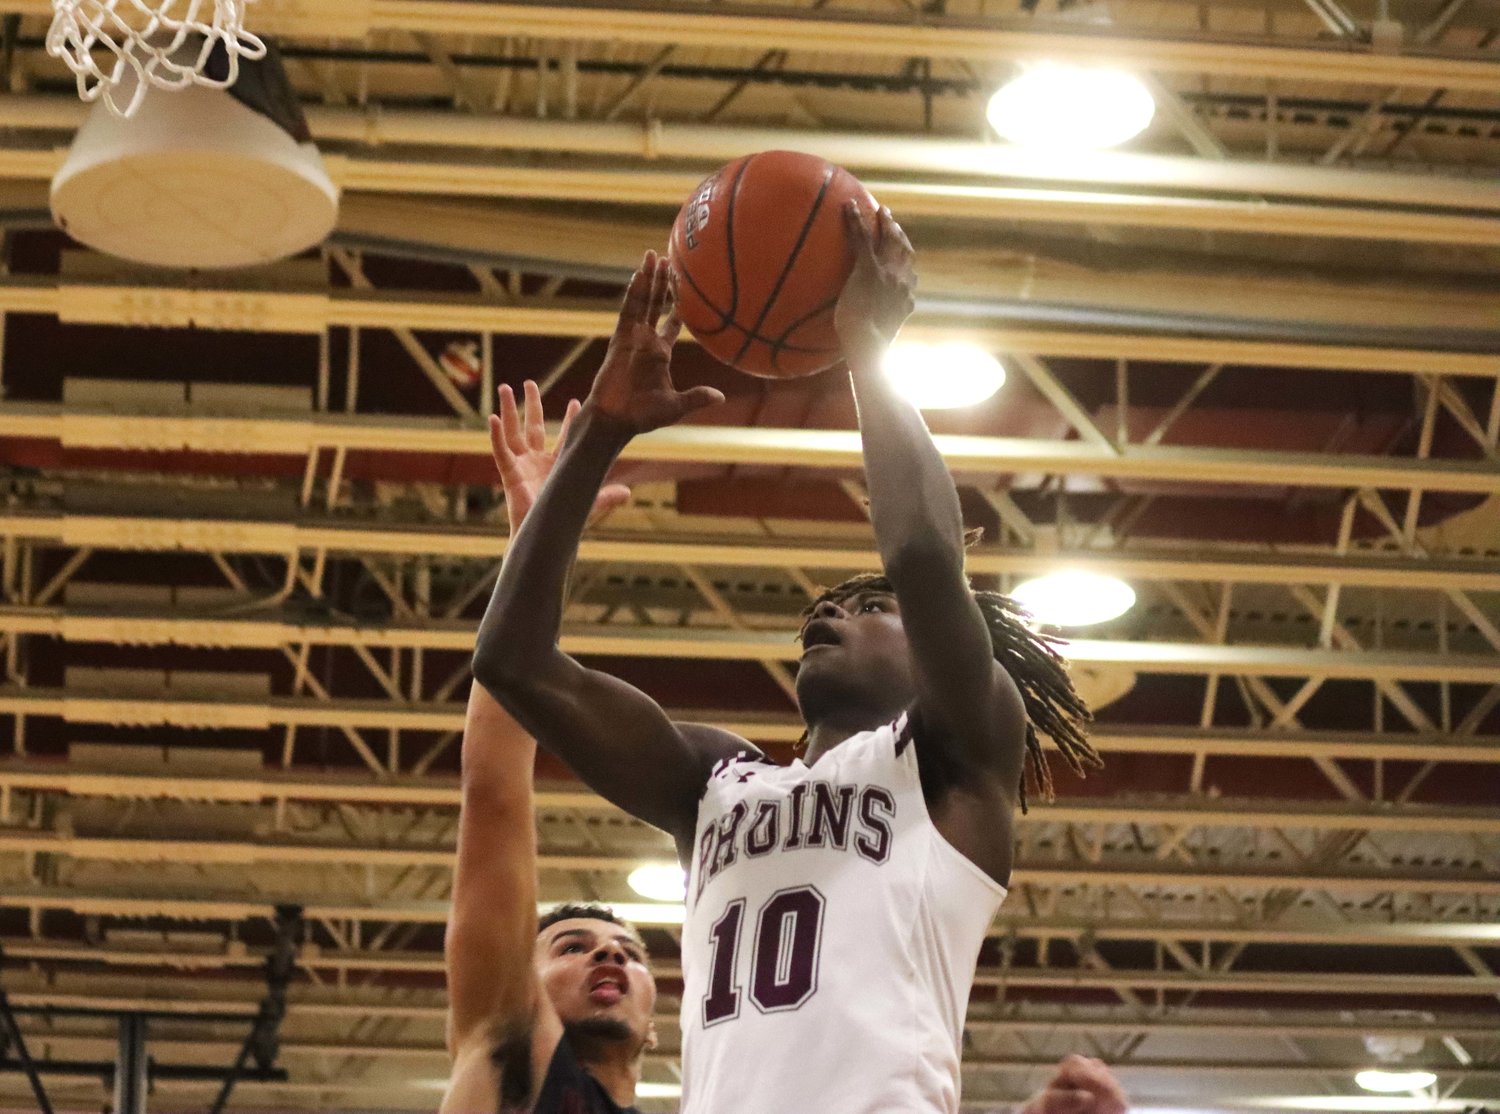 Broadneck junior shooting guard Jalen Carter scored a game-high 17 points, including 12 in the second half.